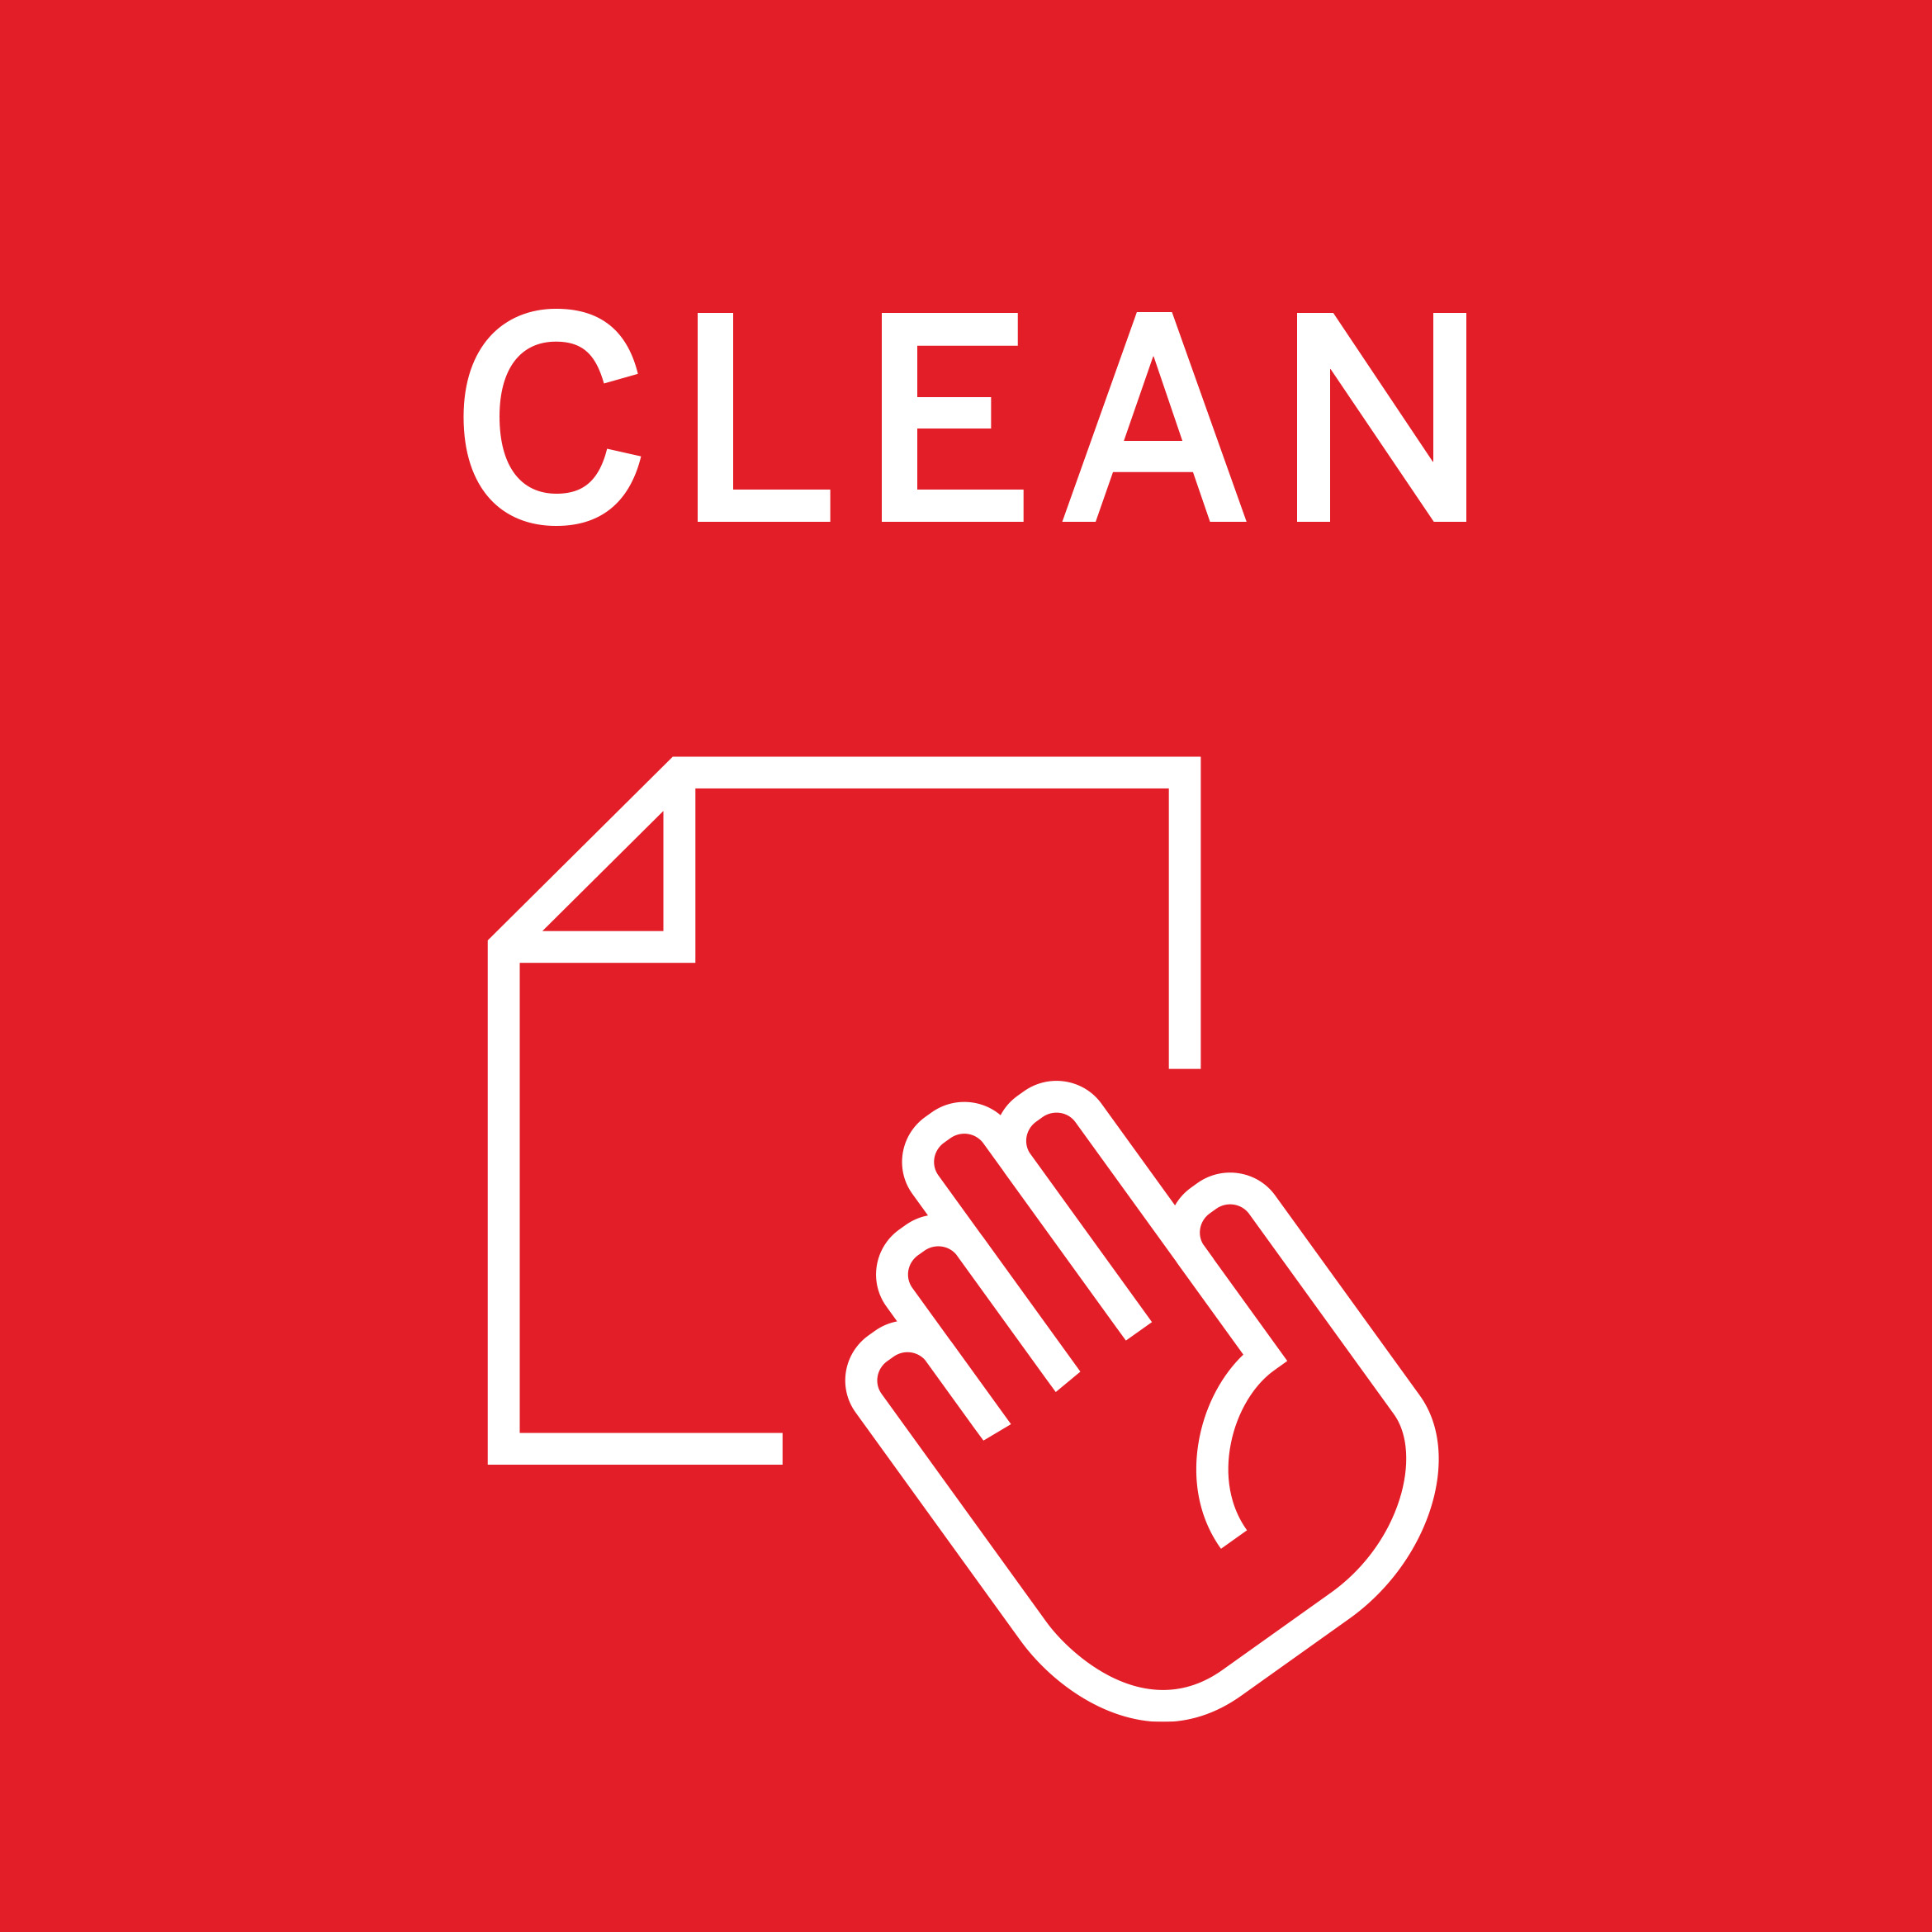 article_universal_cleanandgreen_icon_clean.jpg